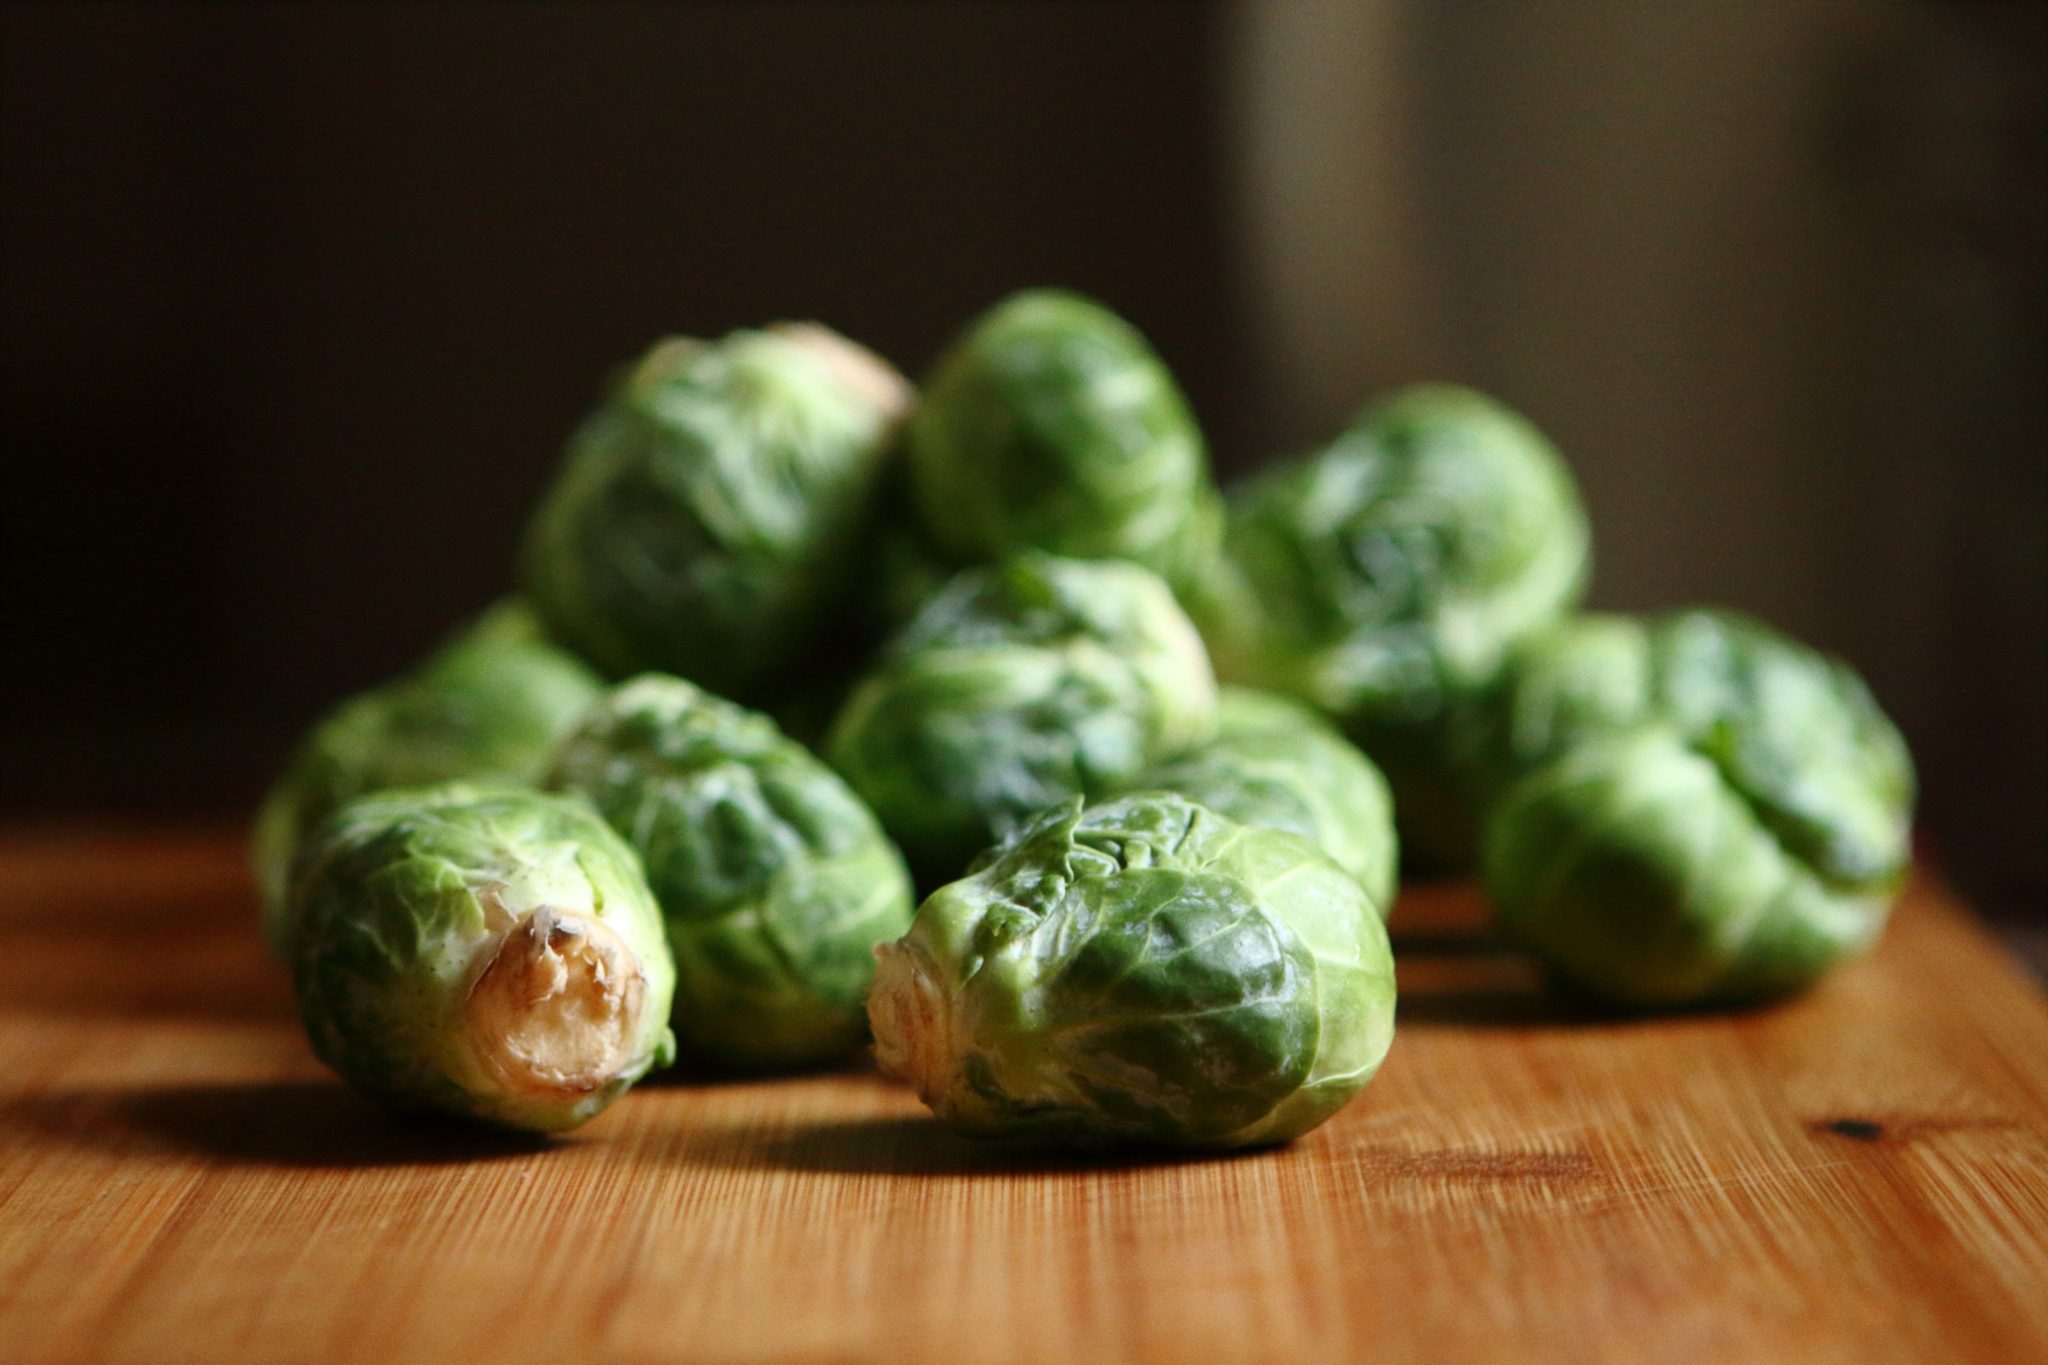 Eat magnesium rich Brussels sprouts